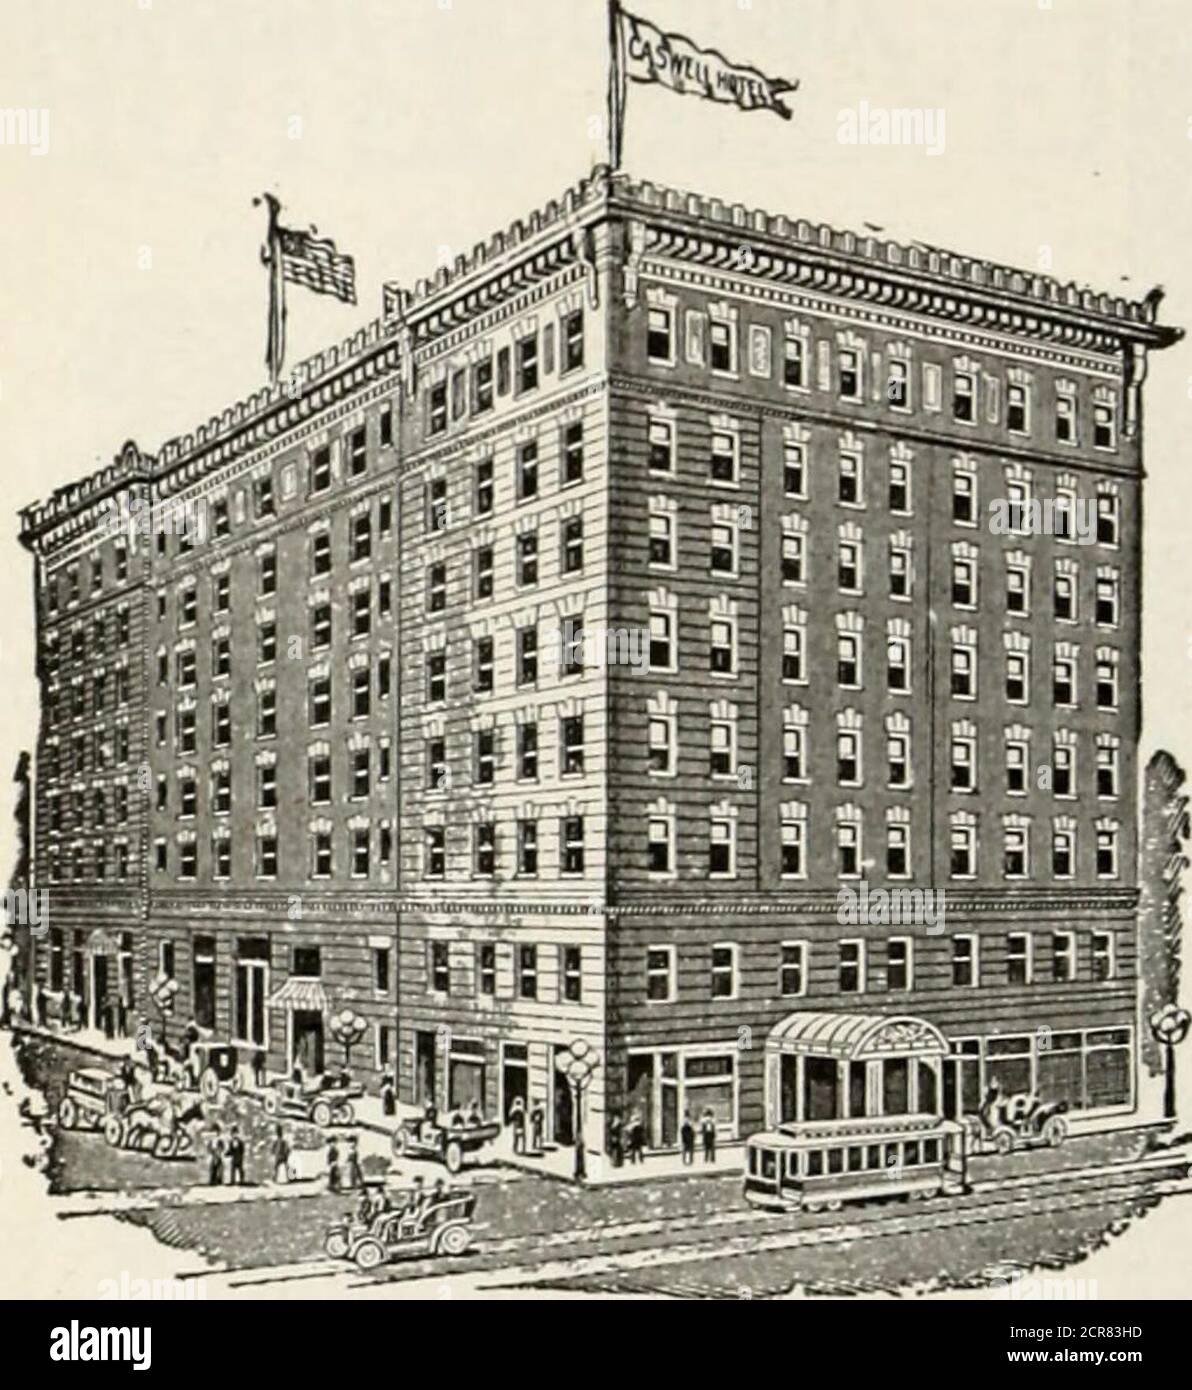 . The Official hotel red book and directory . BALTIMORE—Contd. HOTEL RALEIGH. Ilollidayand Fayette Sts. (E. P.) $1np. John Tjahks, Prop. HOTEL RENNERT. Libertyand Saratoga Sts. (E. P.).$1.50 up. Edw. Davis, Mgr.(Sec illustration and adver-tisement on page 275.) HOTEL SHERWOOD. Monu-ment St.. near Park Ave. (A.P.) $3 and up. J. II. PBICE,Prop. (S(c advertisement l&gt;c-low.) New Academy Hotel. Howard and Franklin Sts. (E. P.) $1. LOOCKERMAN & BARRY.NEW HOTEL CONDON. (A. P. $2.50 up.) E. J. Roberts, Jr., Mgr.NEW HOWARD. Howard and Baltimore Sts. (E. P.) $1.50 up. Harry Busick, Mgr.ST. CHARLES HO Stock Photo